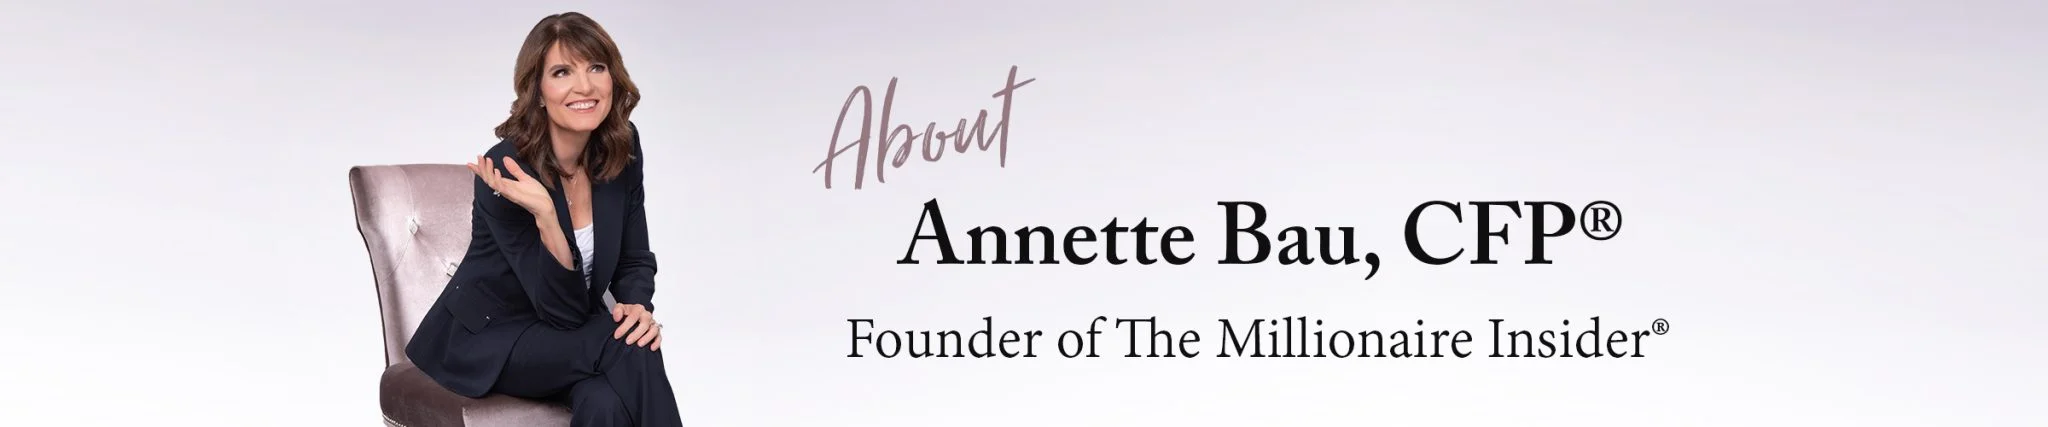 About Annette Bau and The Millionaire Insider®